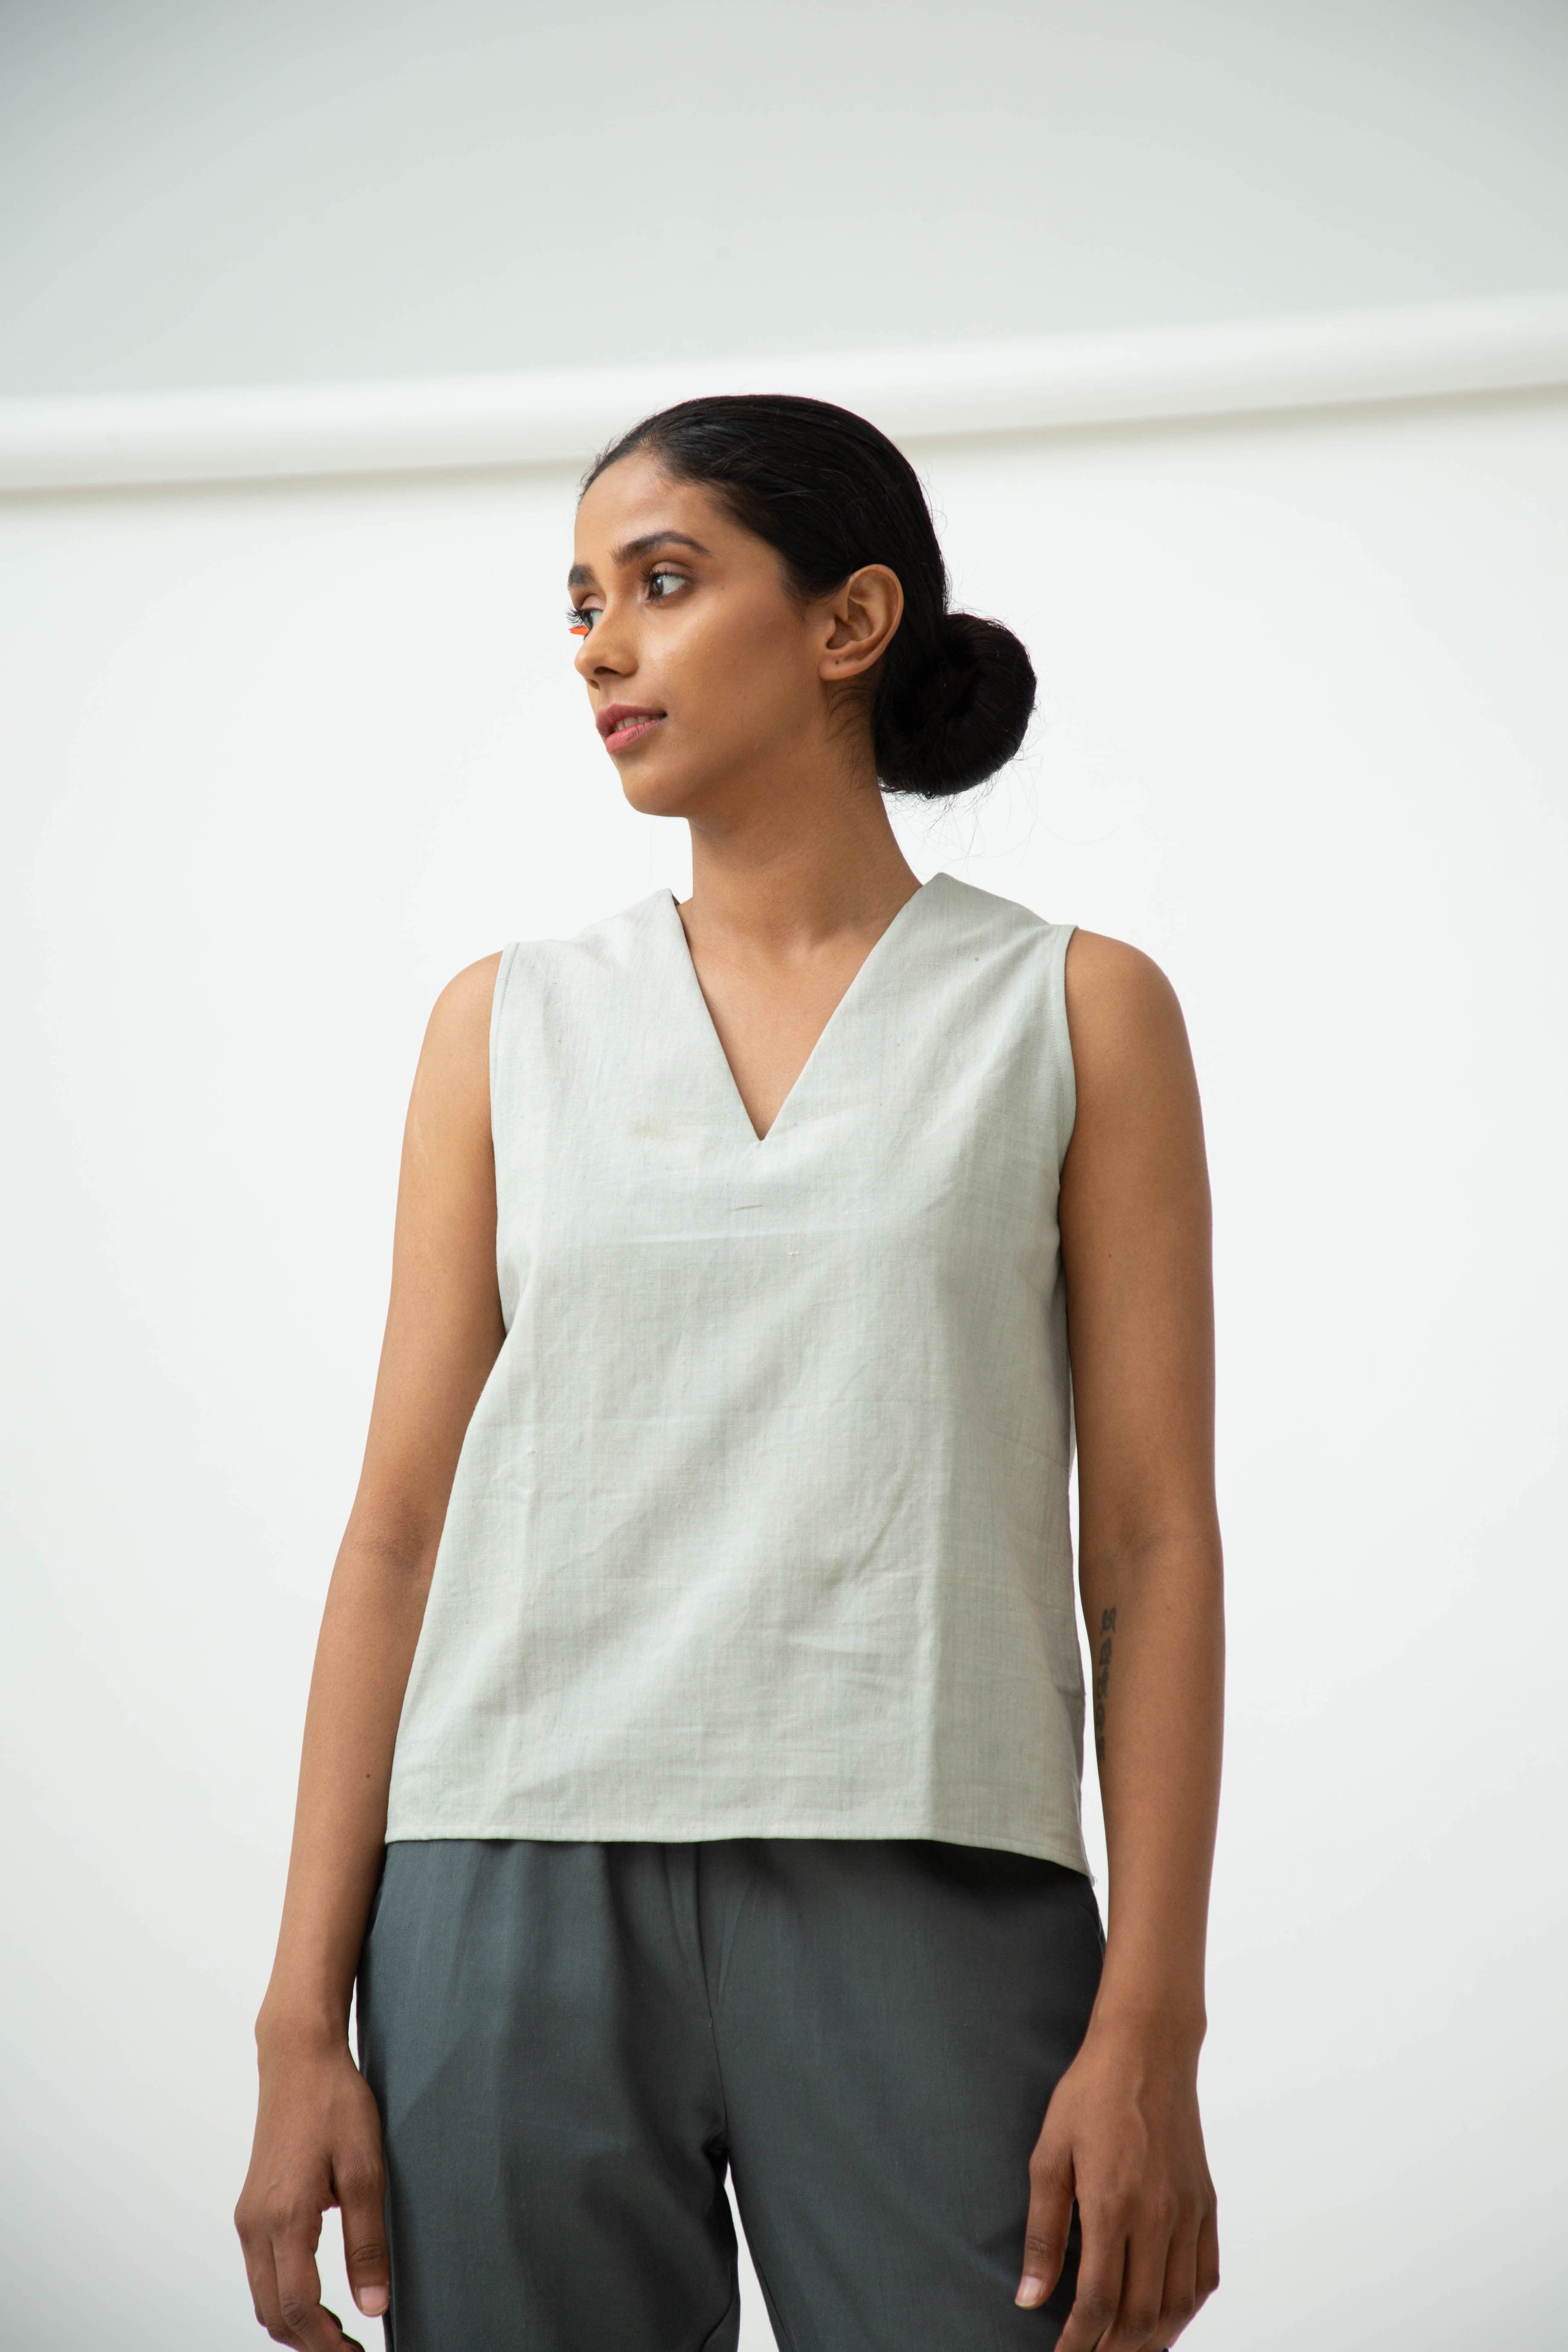 Saltpetre womens wear, indo-western shell top for semi formal, casual, occassional wear. Comfortably elegant woth delivate feminine straps in cloud grey colour.